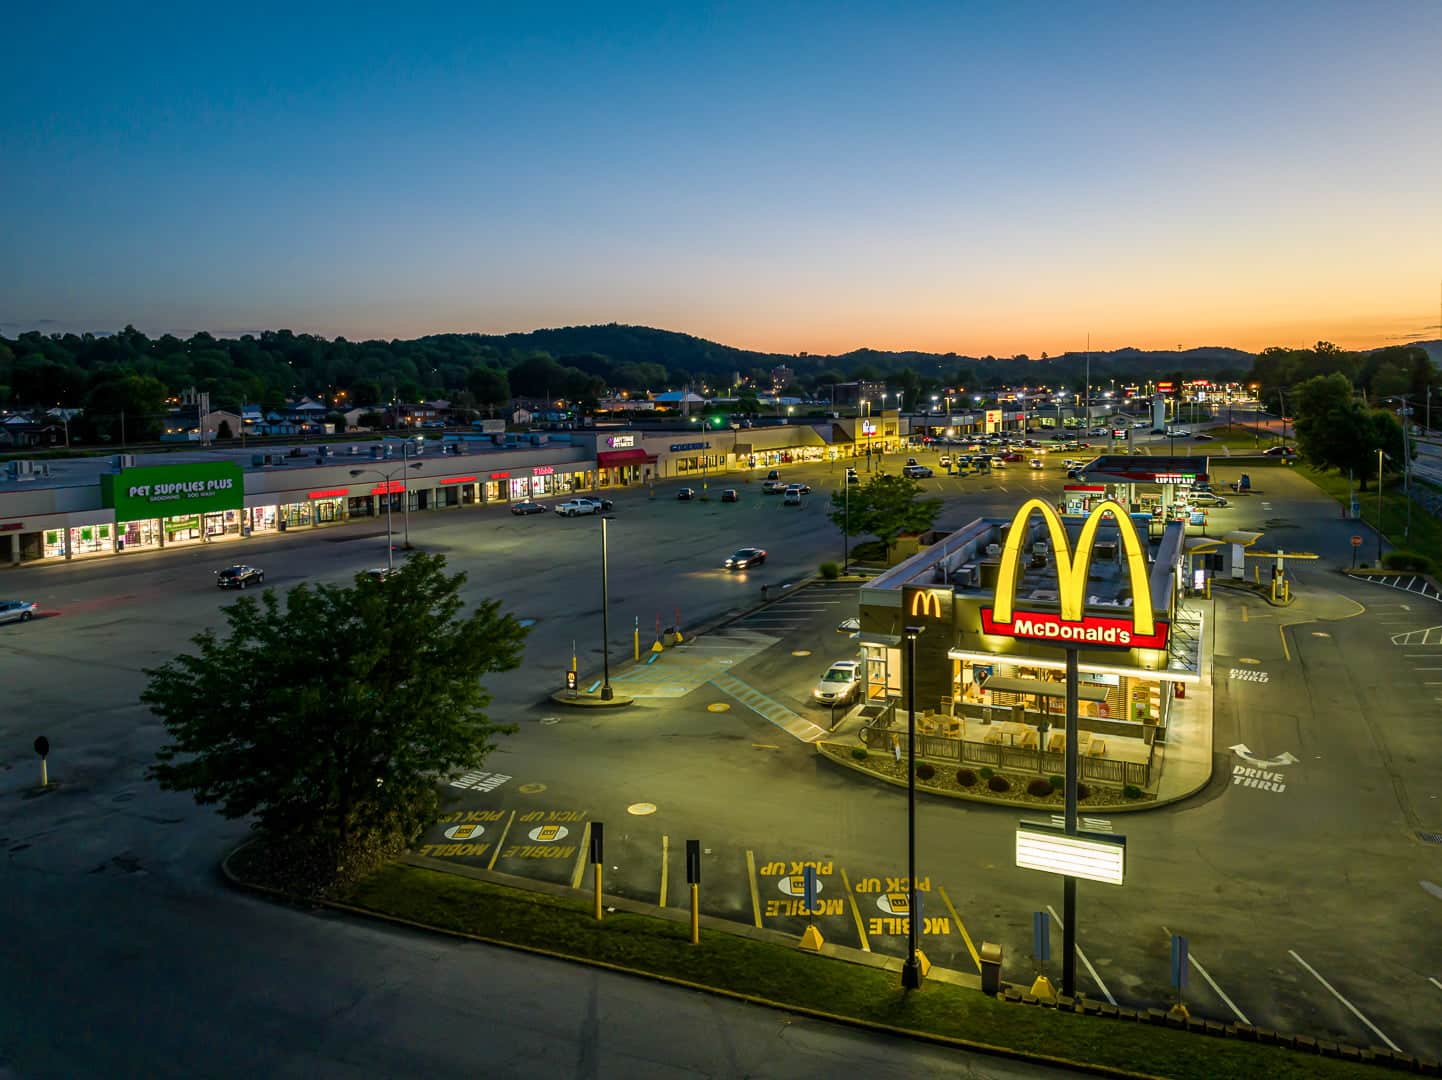 Aerial night view of a commercial district with illuminated McDonald's in St. Albans, WV.